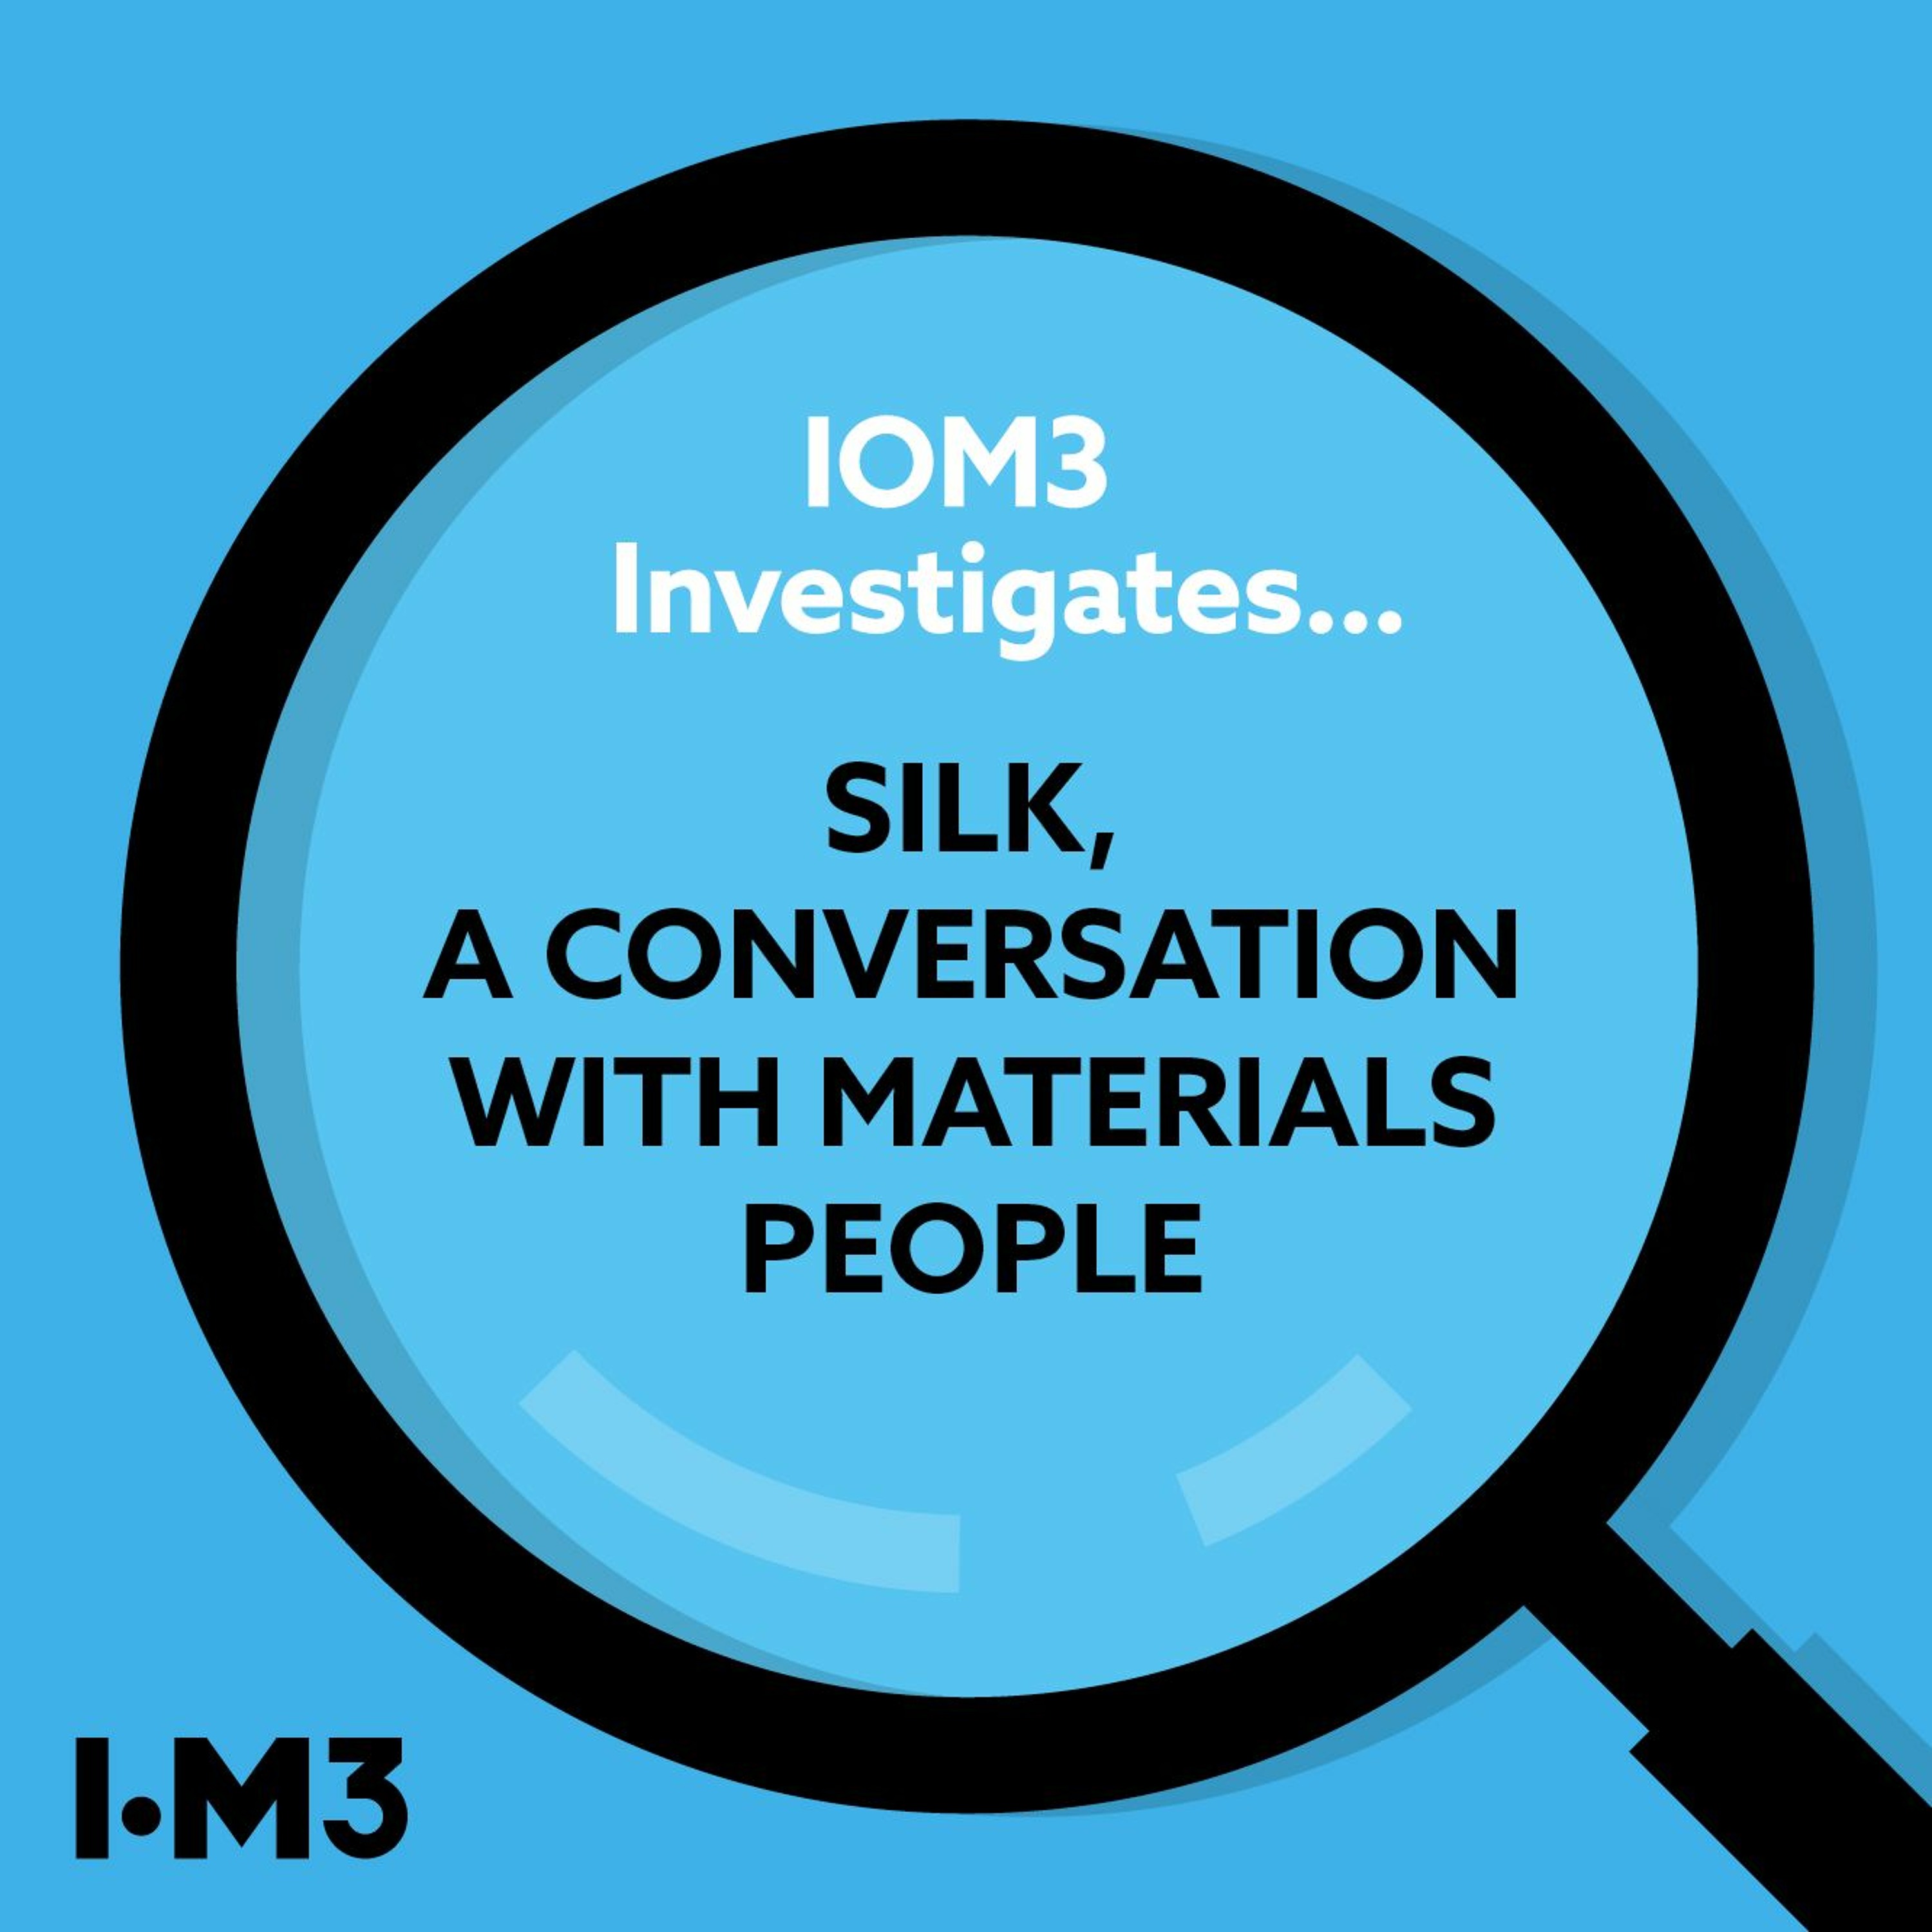 IOM3 Investigates… Silk, a conversation with Materials People